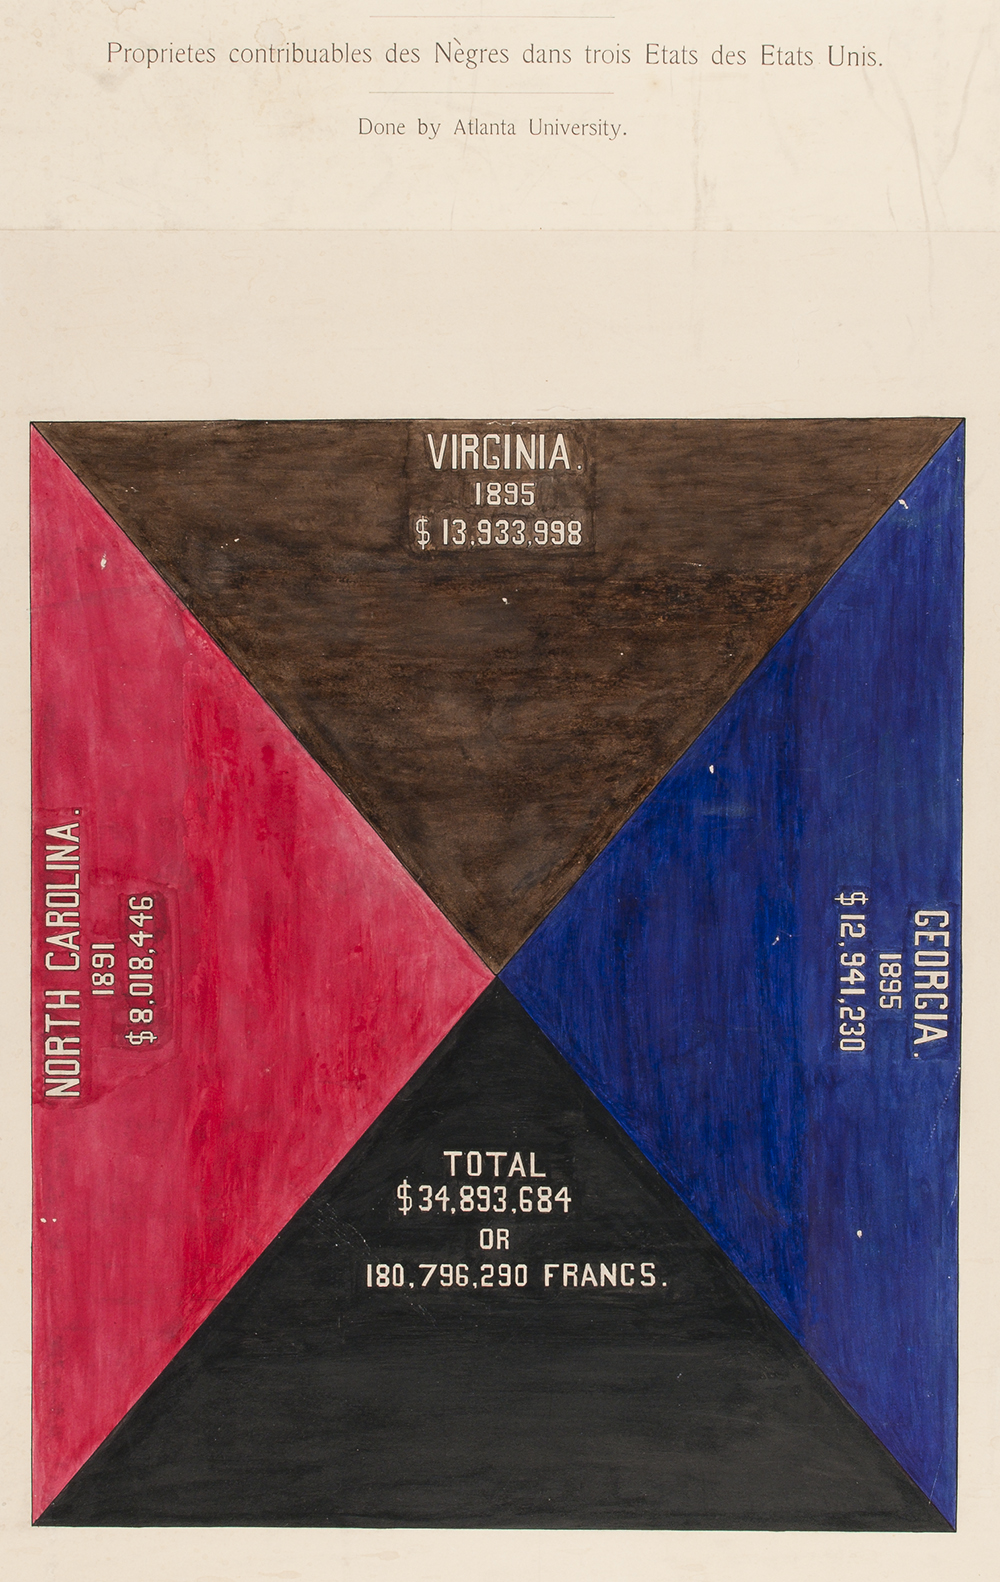 Assessed value of property owned by Negroes in three states, from a series of statistical charts illustrating the condition of the descendants of former African slaves now in residence in the United States of America, by W.E.B. Du Bois, c. 1900. Library of Congress, Prints and Photographs Division.